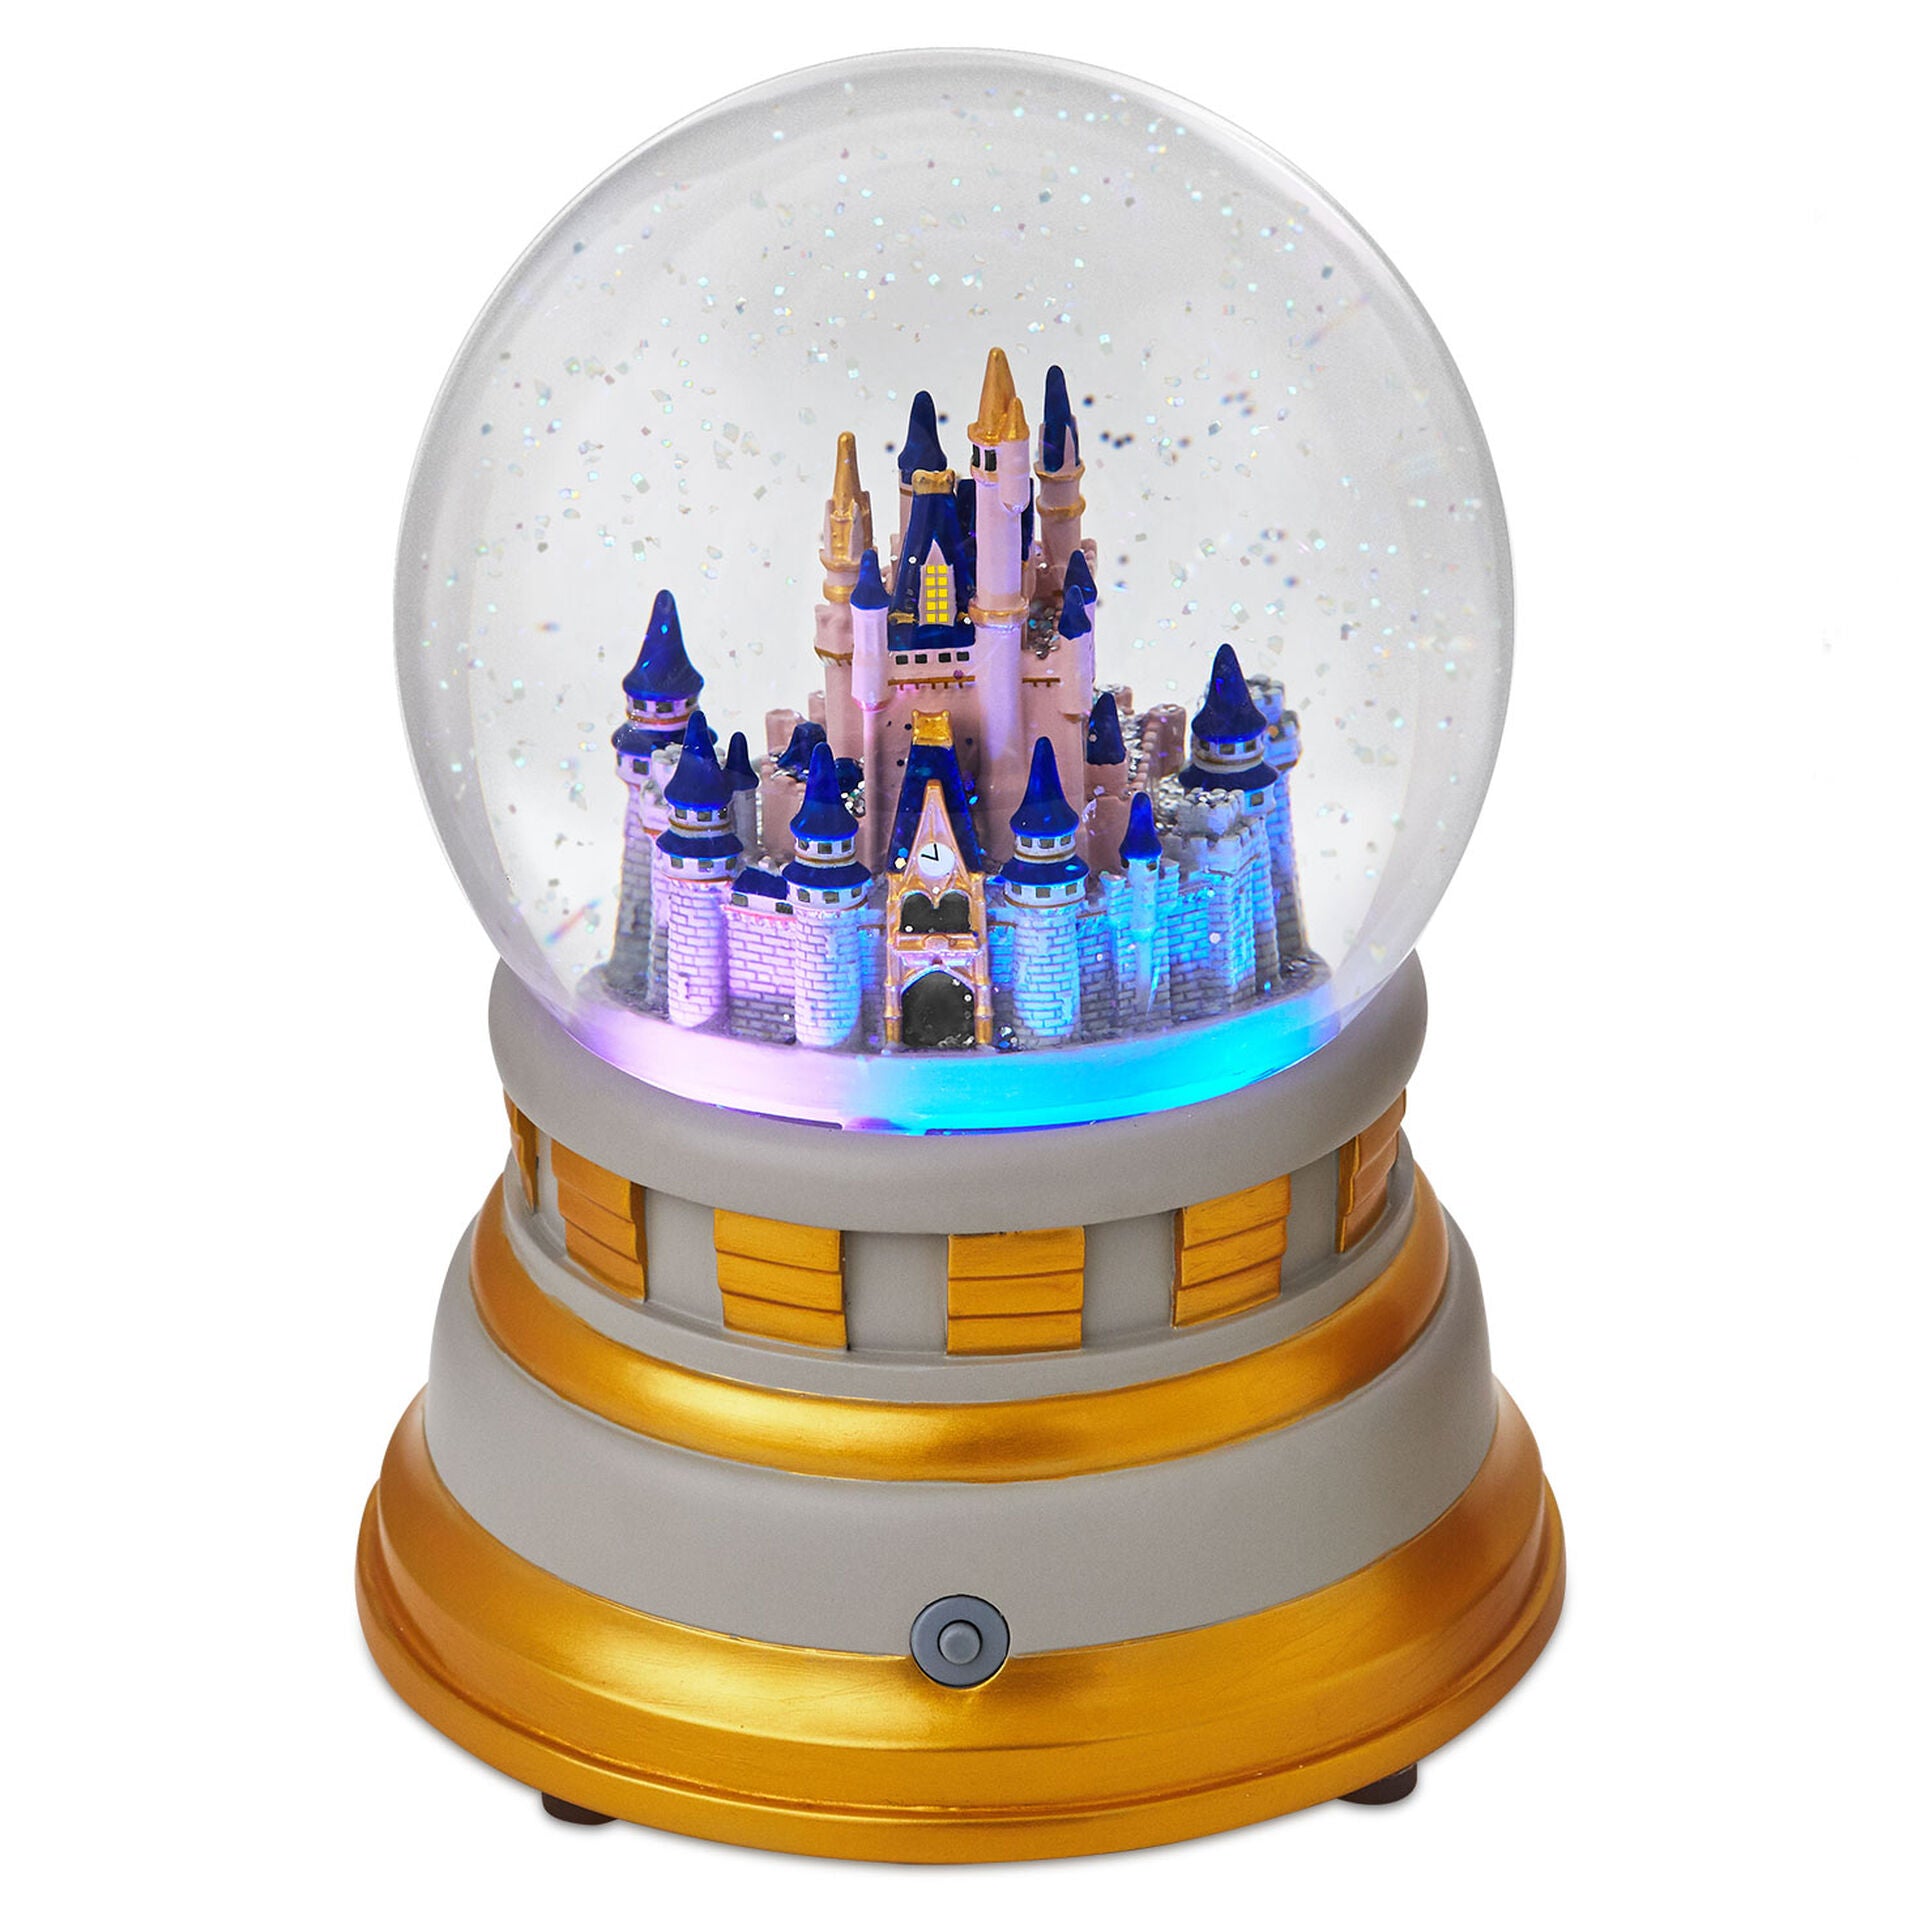 Disney Showcase D100 Limited Edition 1923 Waterball